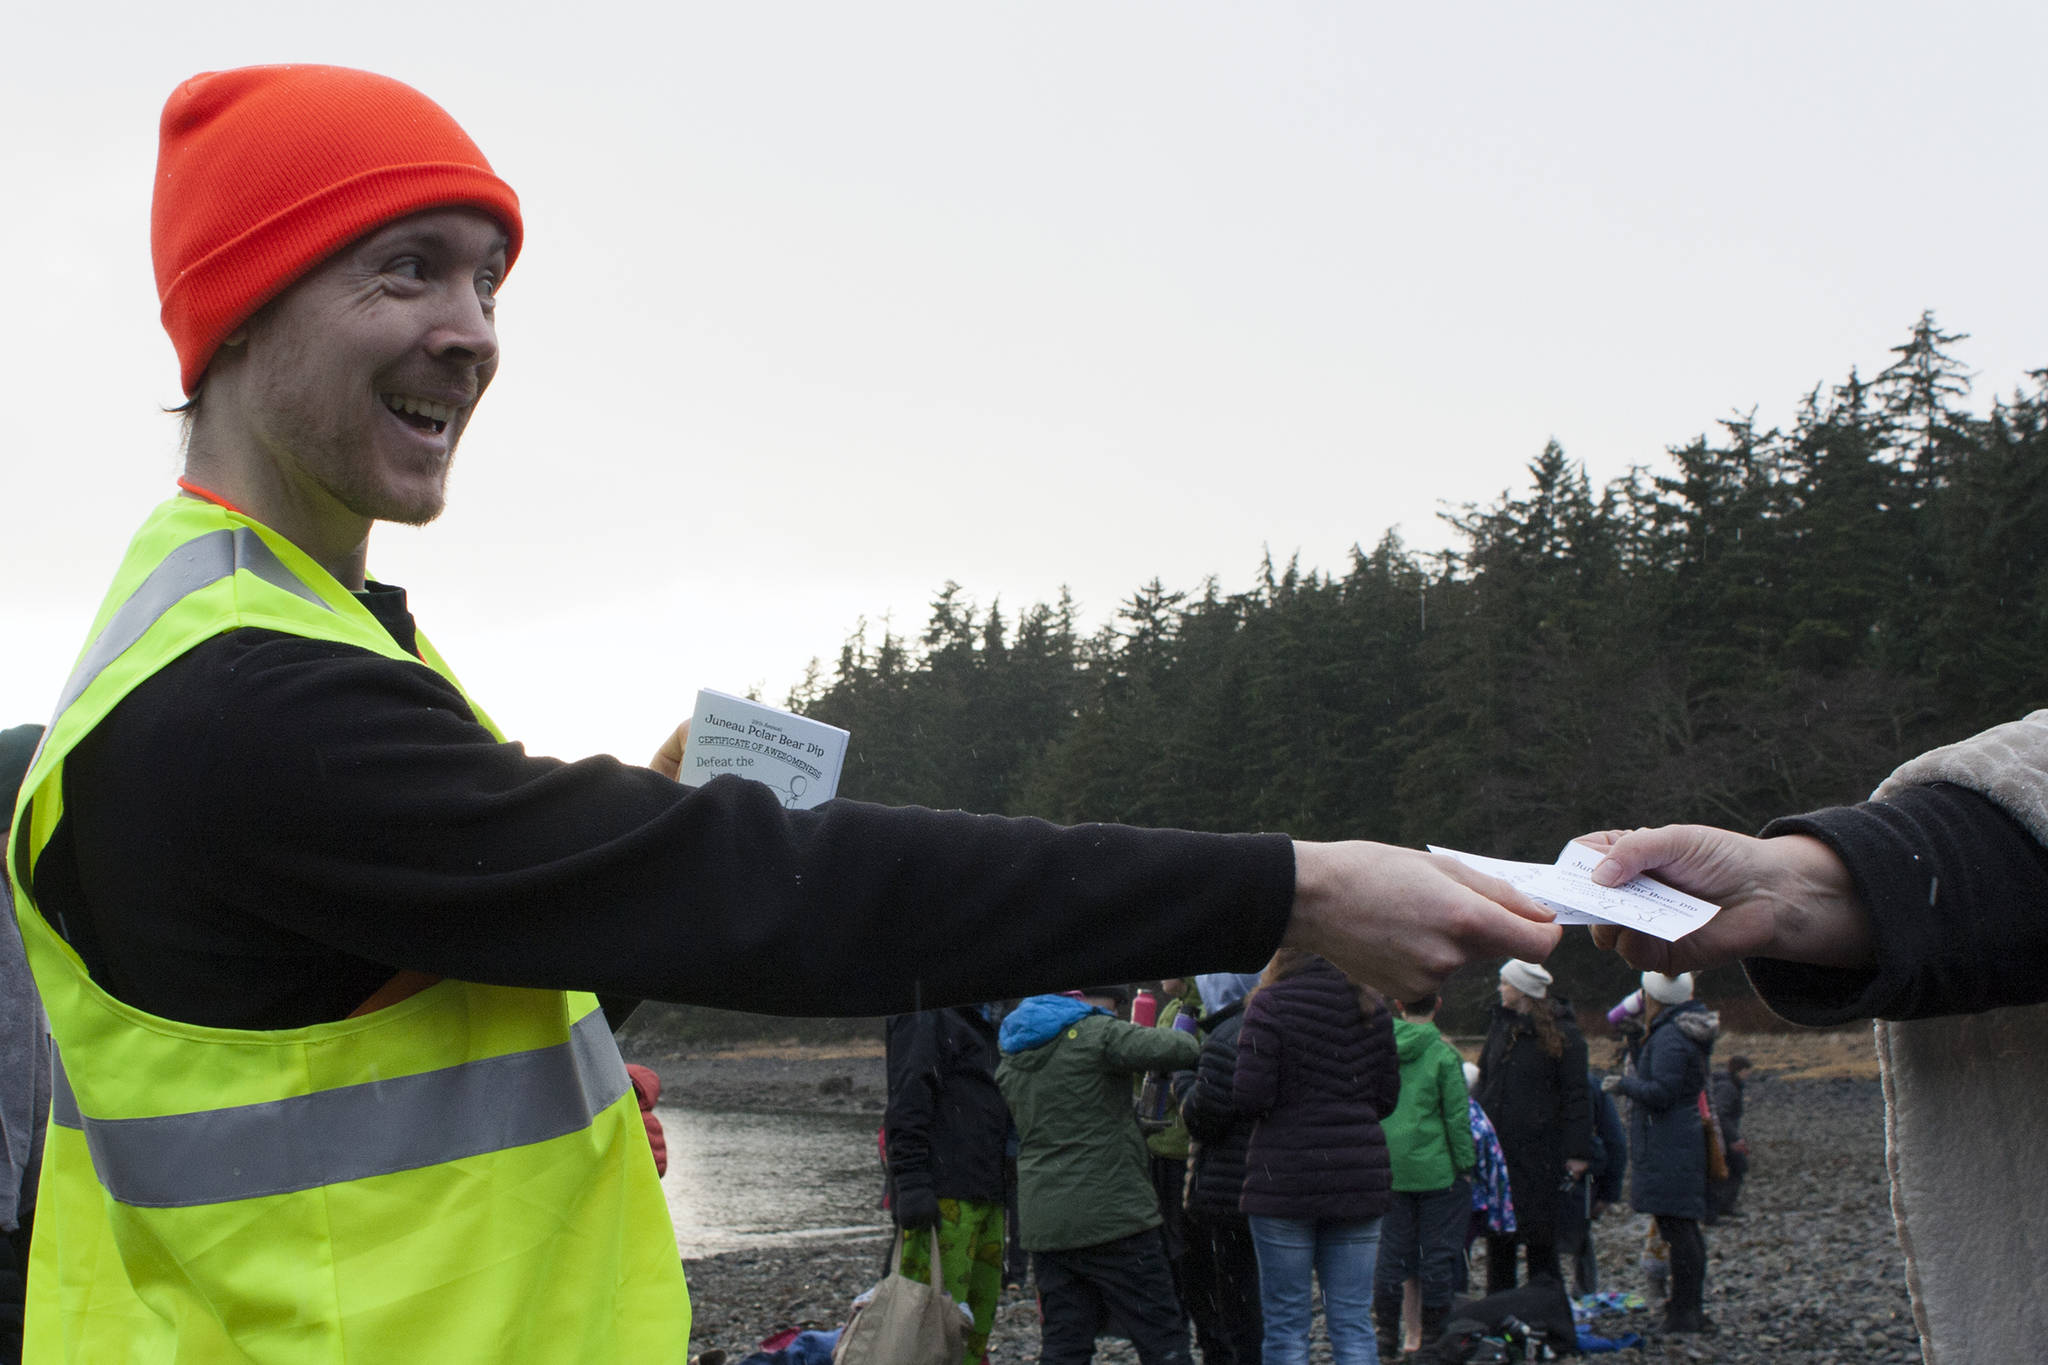 Carl Brodersen hands out a certificate of awesomeness to a participant in the 2020 Polar Dip. (Ben Hohenstatt | Juneau Empire)